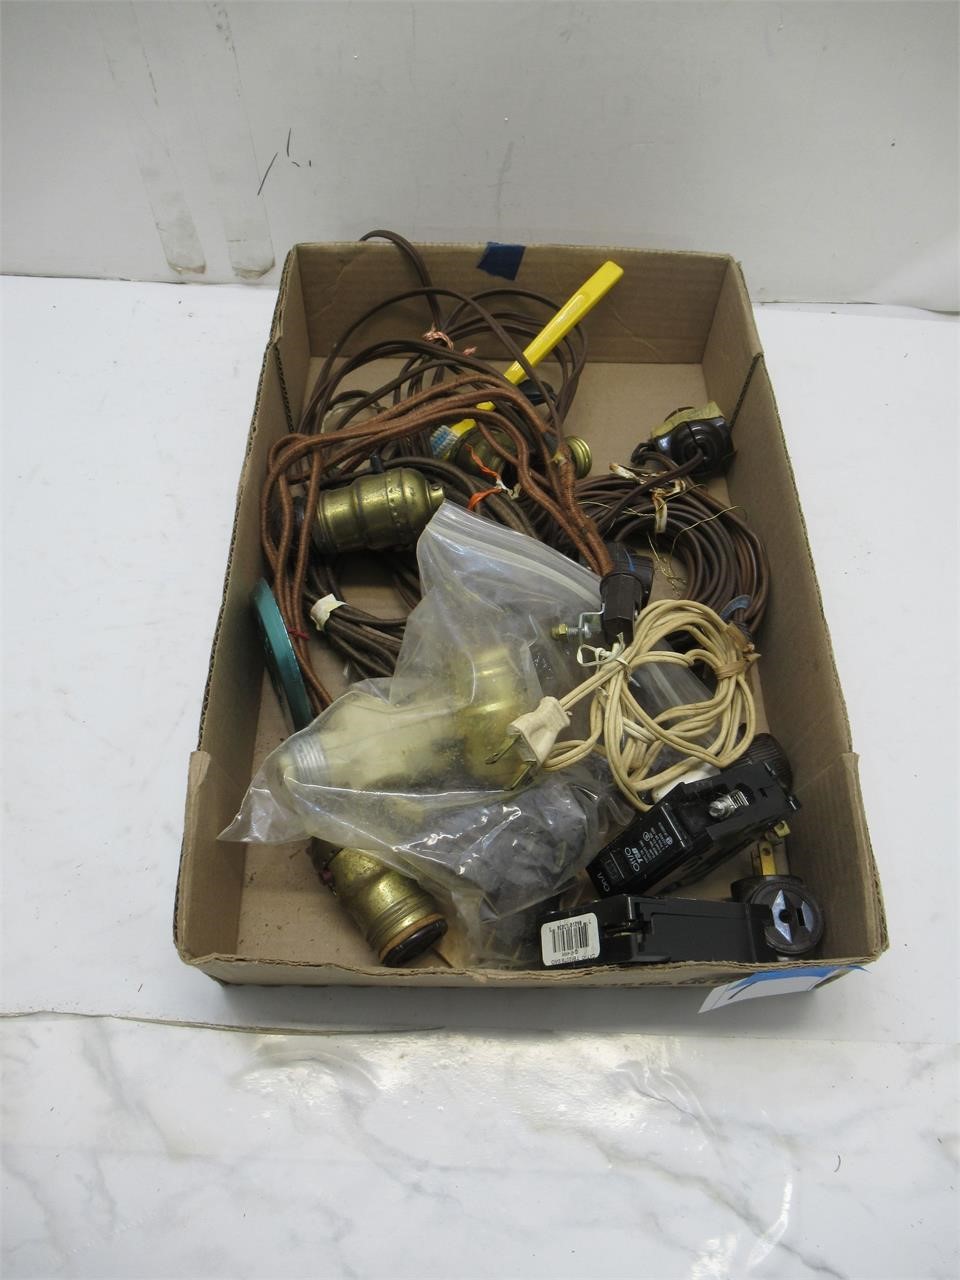 sockets, wire, electrical items